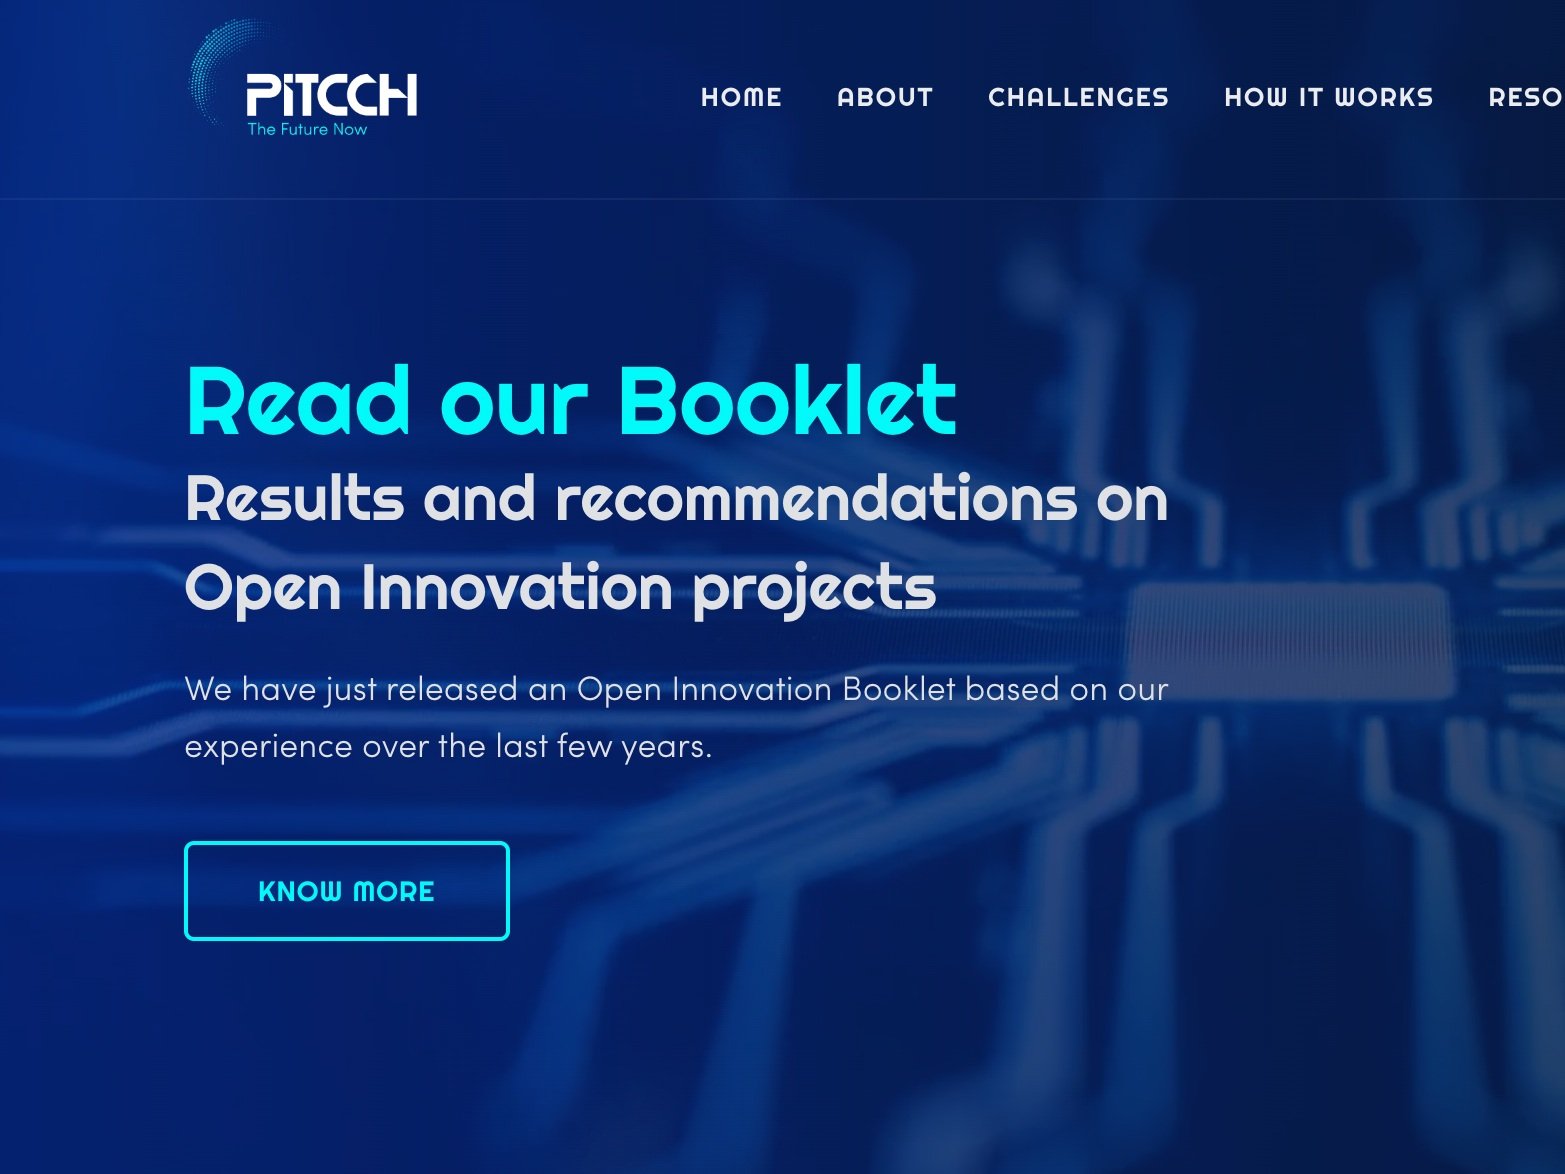 PITCCH Project has proudly achieved insightful outcomes on Open Innovation